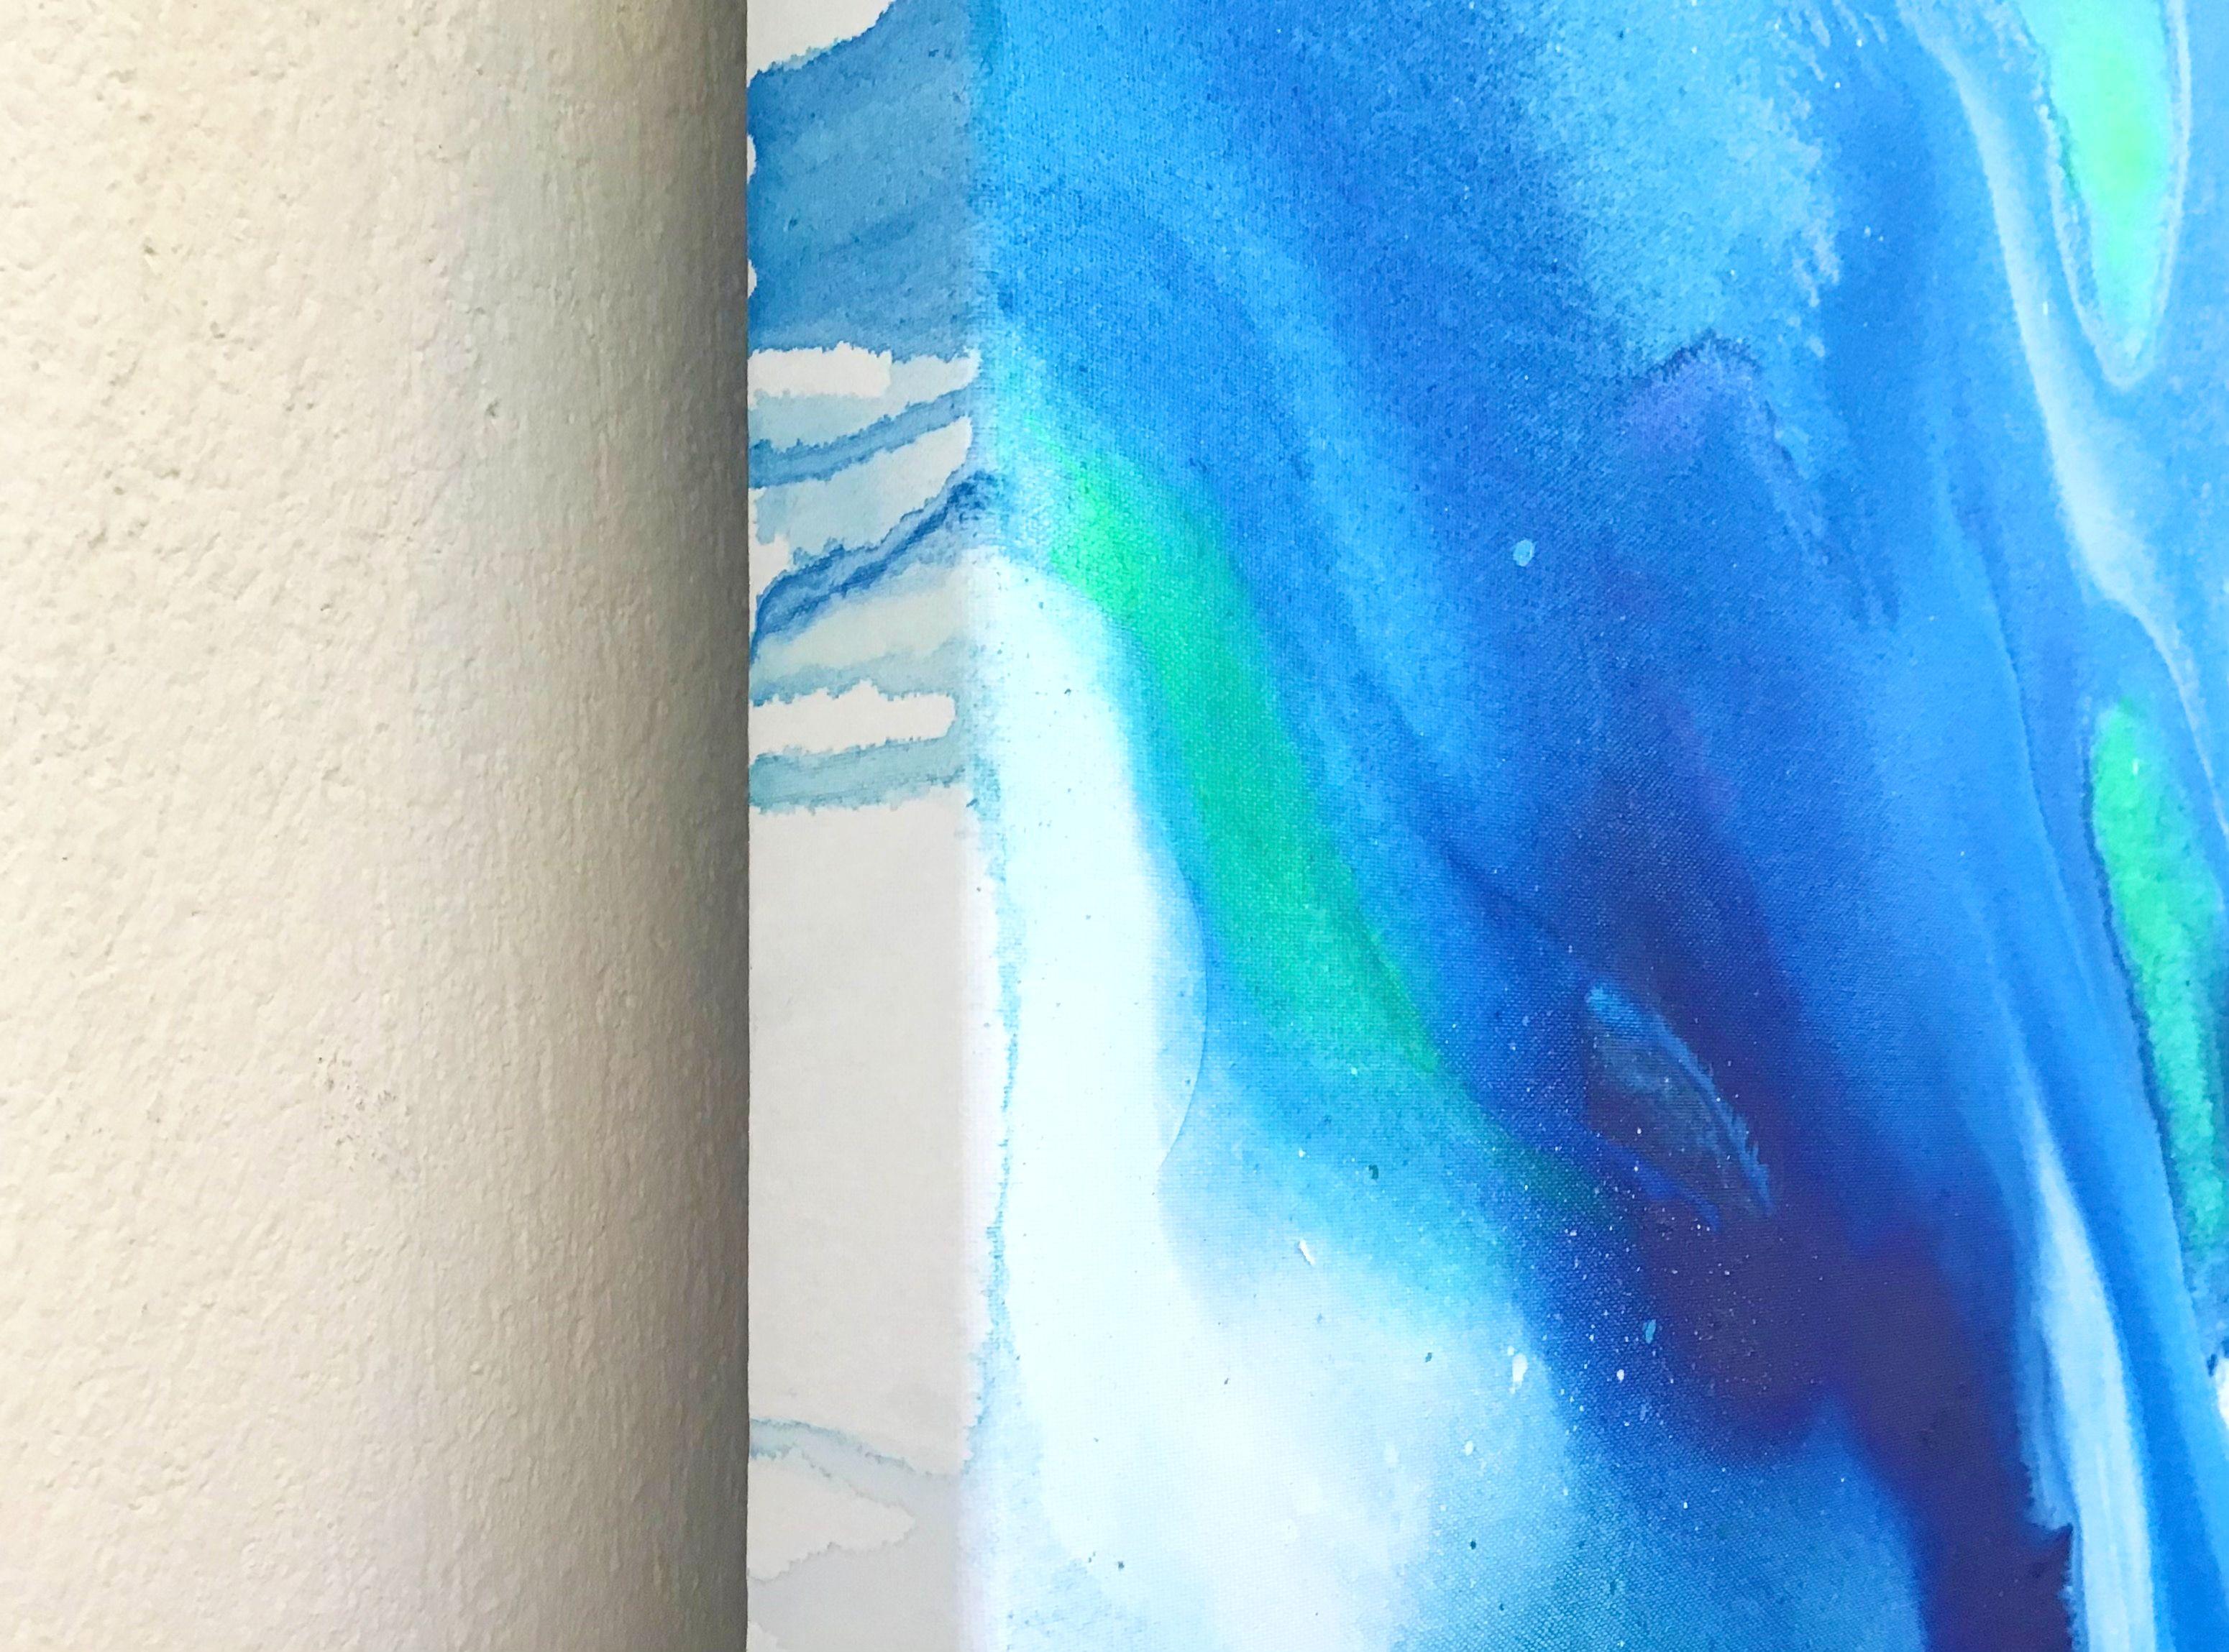 TITLE: THE FLOW OF BLUE (diptych)    DESCRIPTION: This artwork was created in a moment of great awareness, peace, and  balance. It is about the wonderful feeling of a harmonious flow.    MATERIALS: It is painted with high quality acrylics, and spray